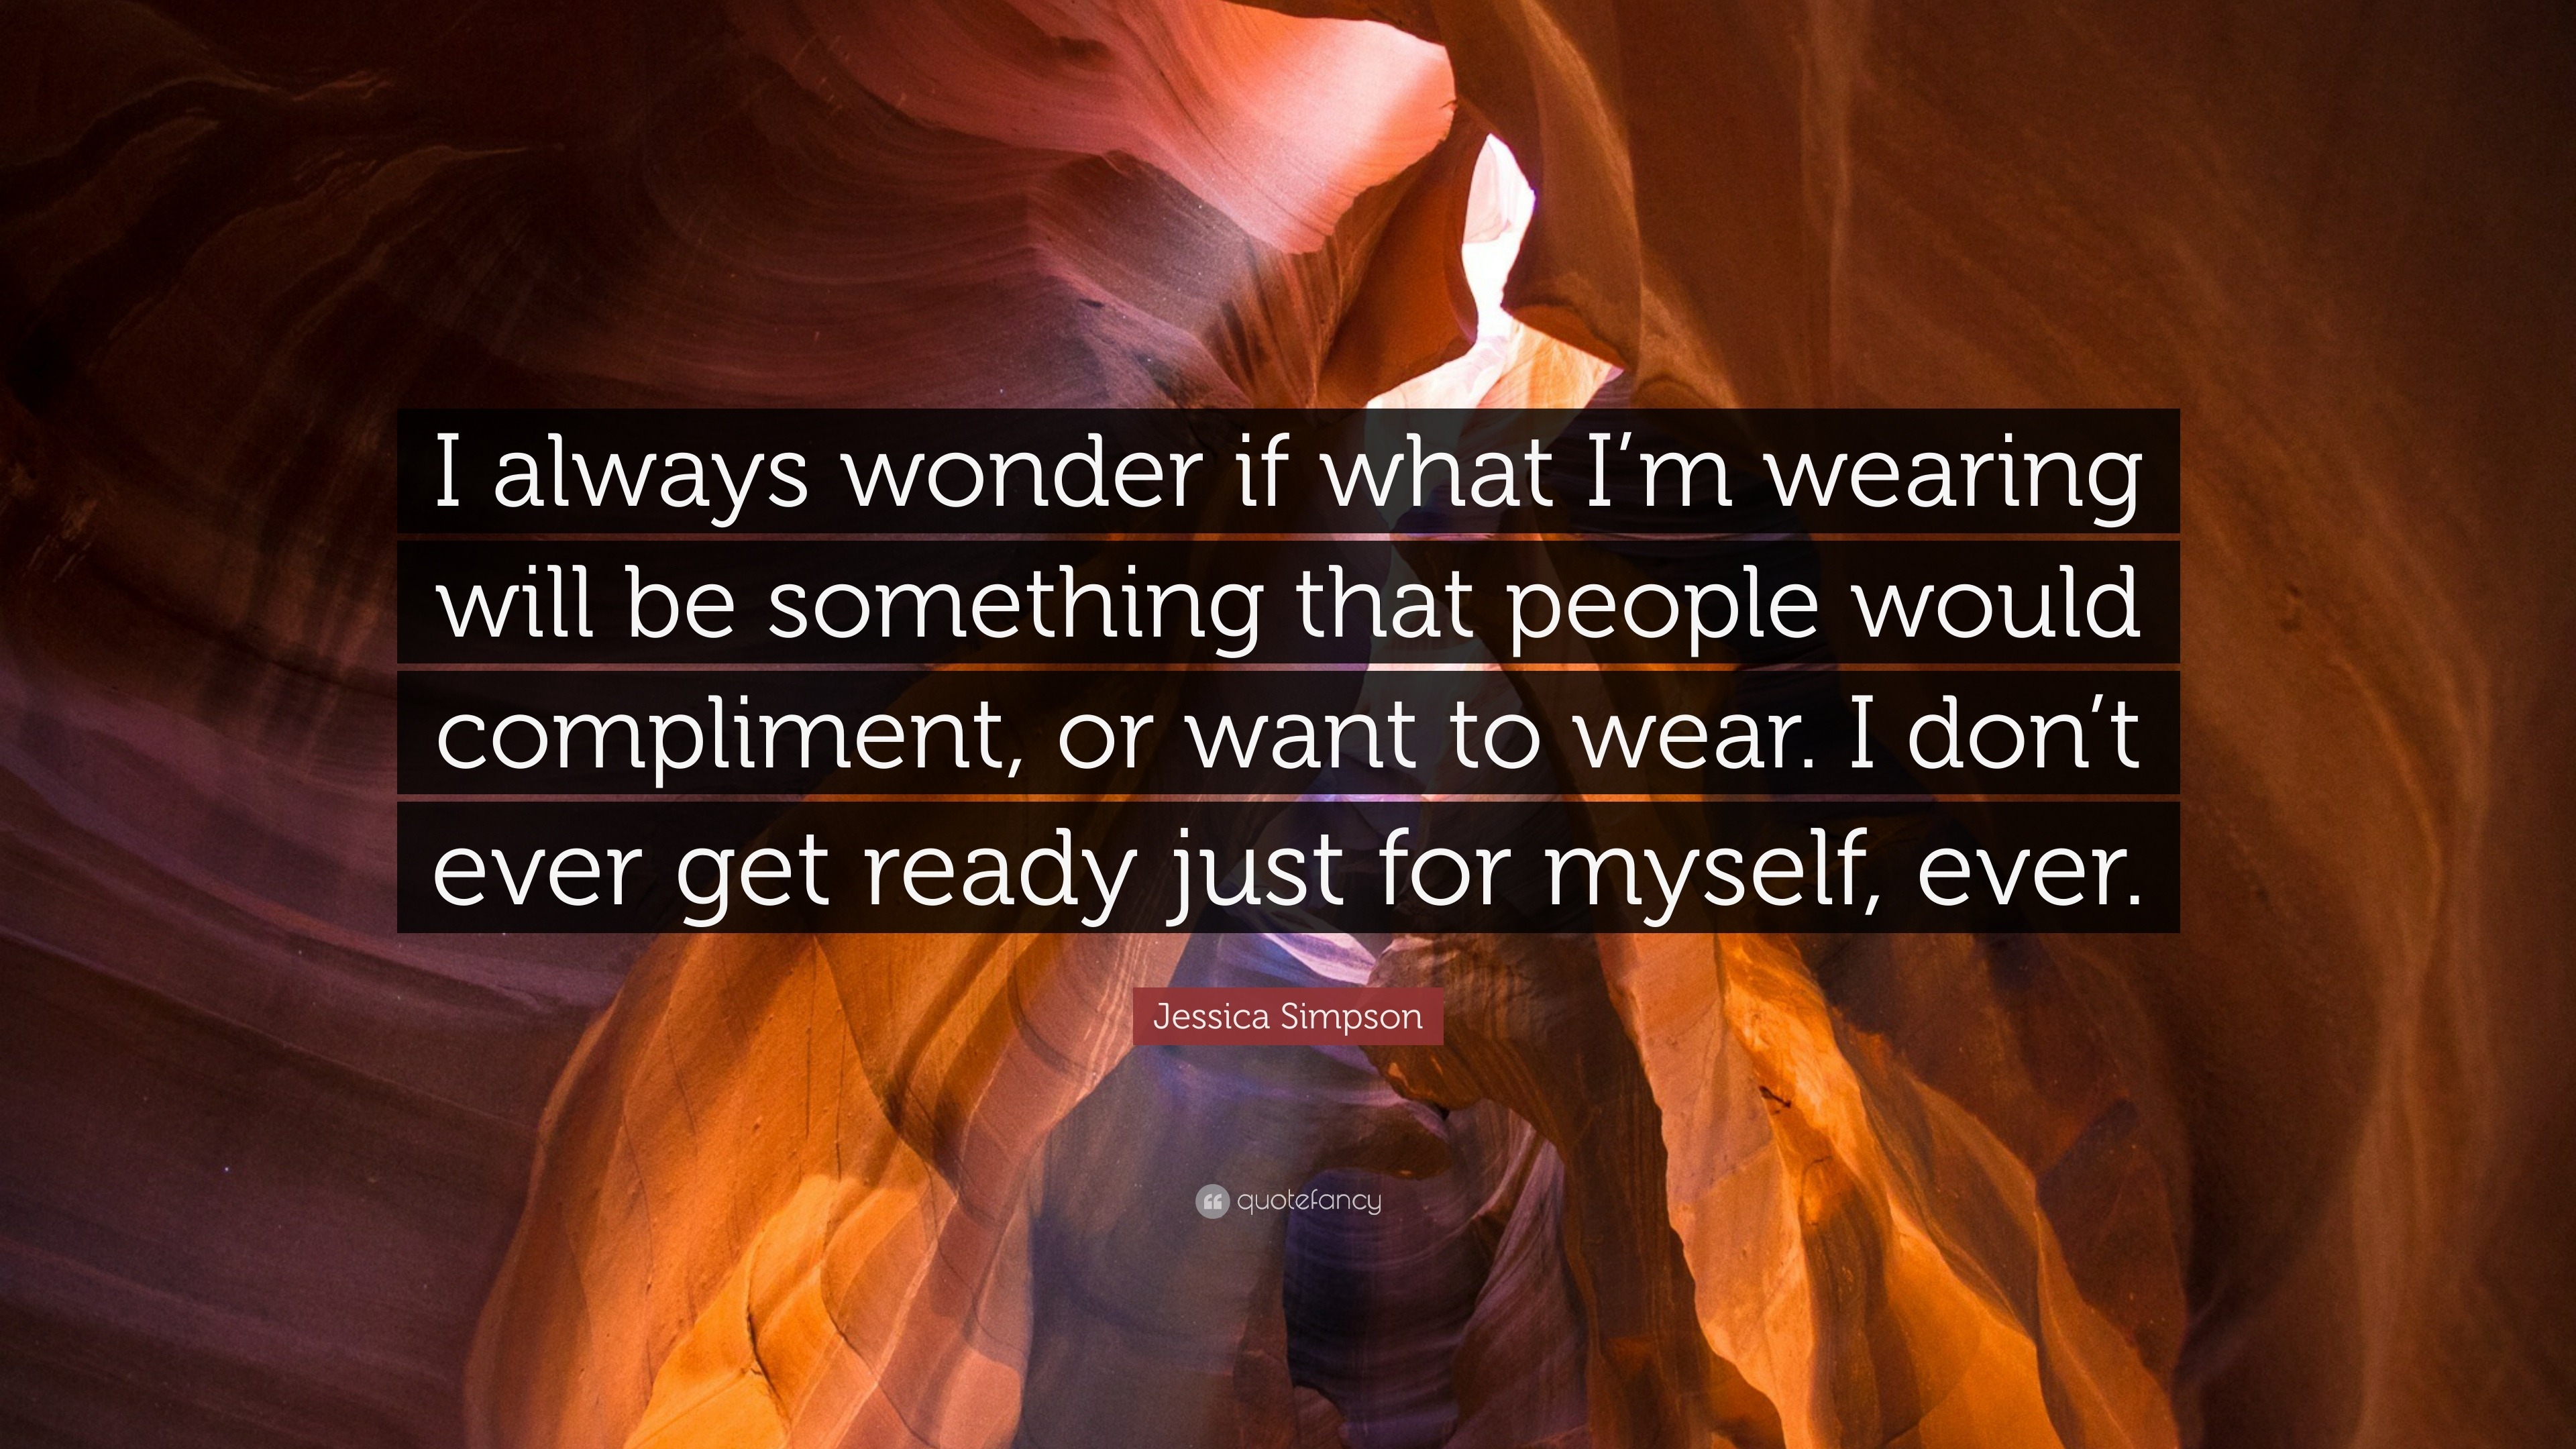 https://quotefancy.com/media/wallpaper/3840x2160/741486-Jessica-Simpson-Quote-I-always-wonder-if-what-I-m-wearing-will-be.jpg